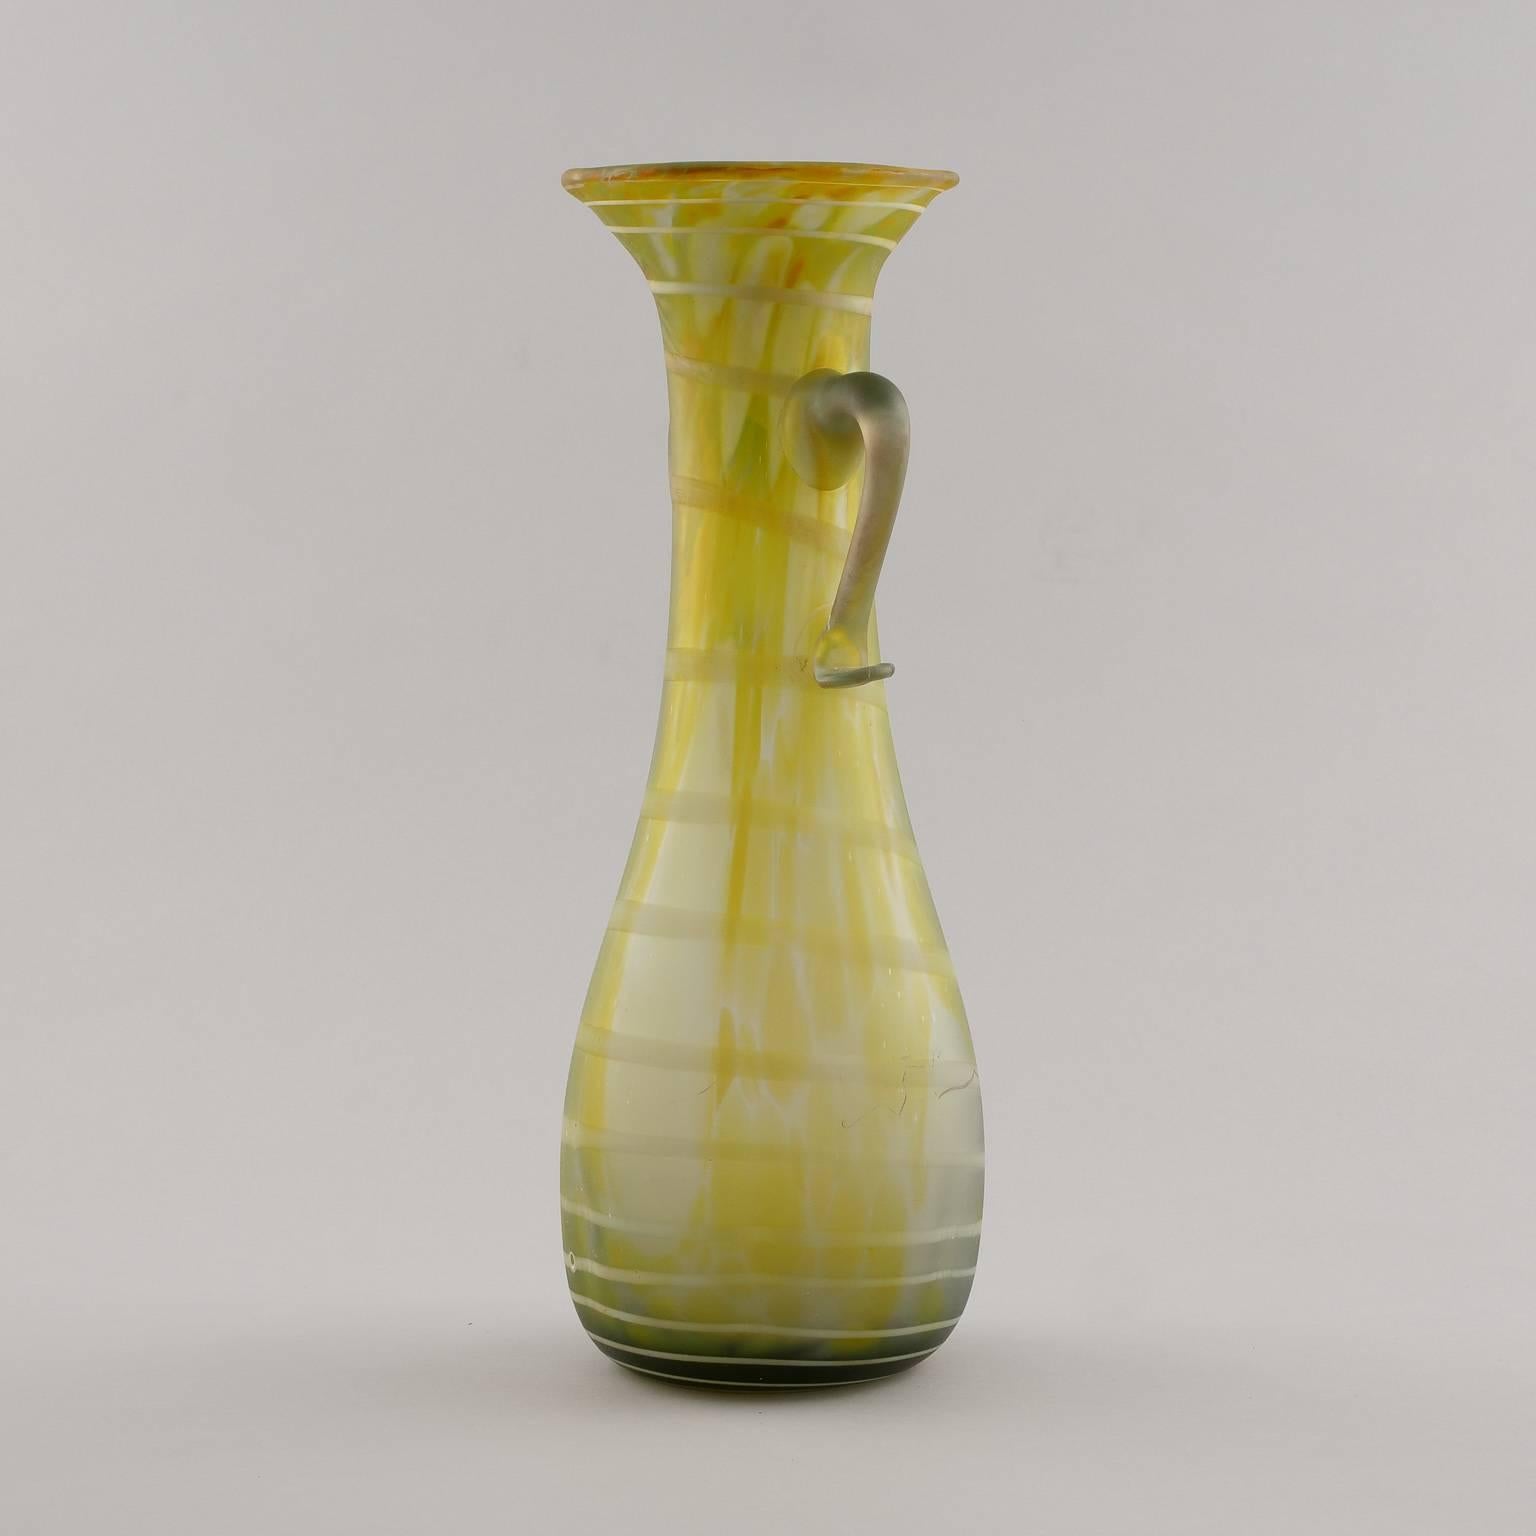 Spring green Italian mouth blown glass vase with handles on neck and subtle white stripes, circa 1970s. Two available in this style. Sold and priced individually.